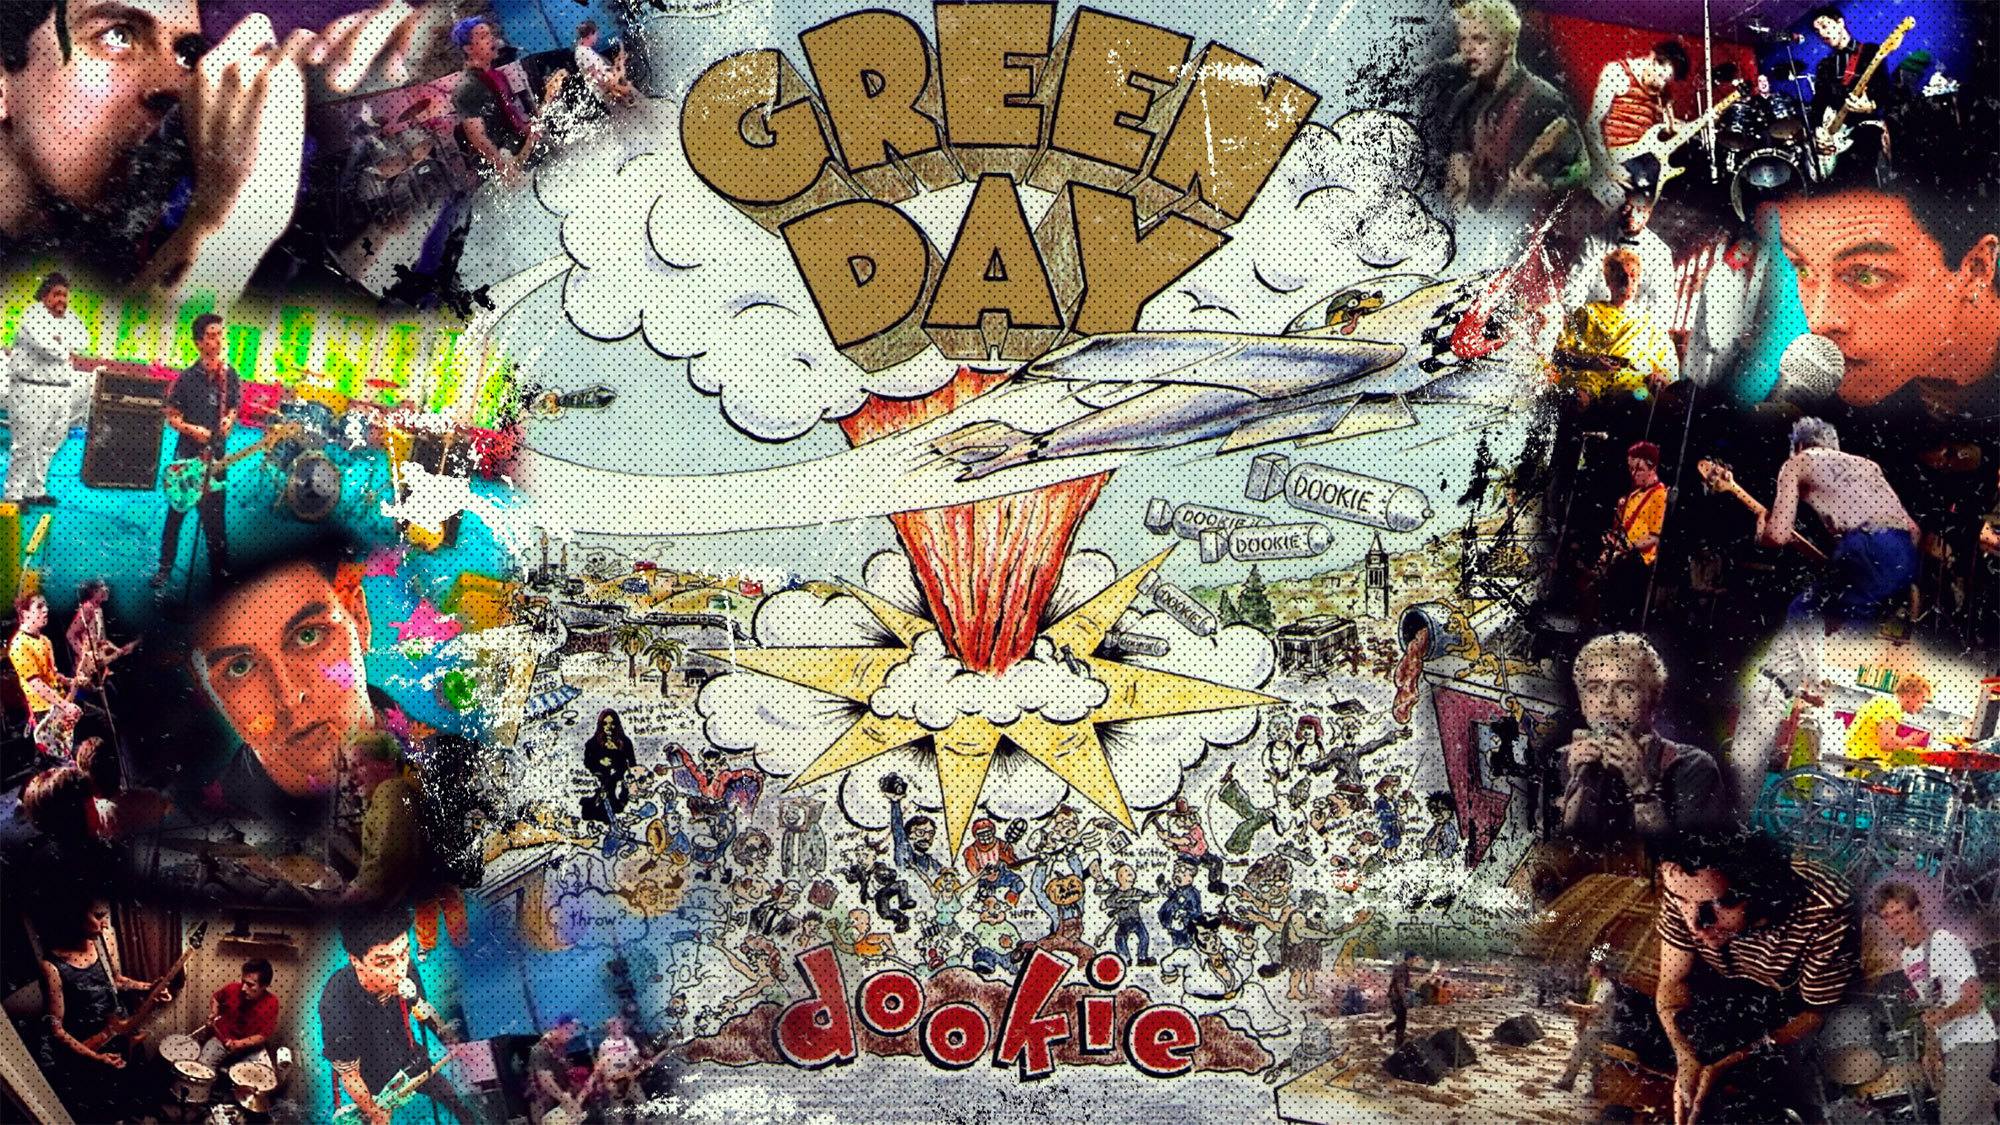 How Green Day's Dookie captured the spirit of a generation